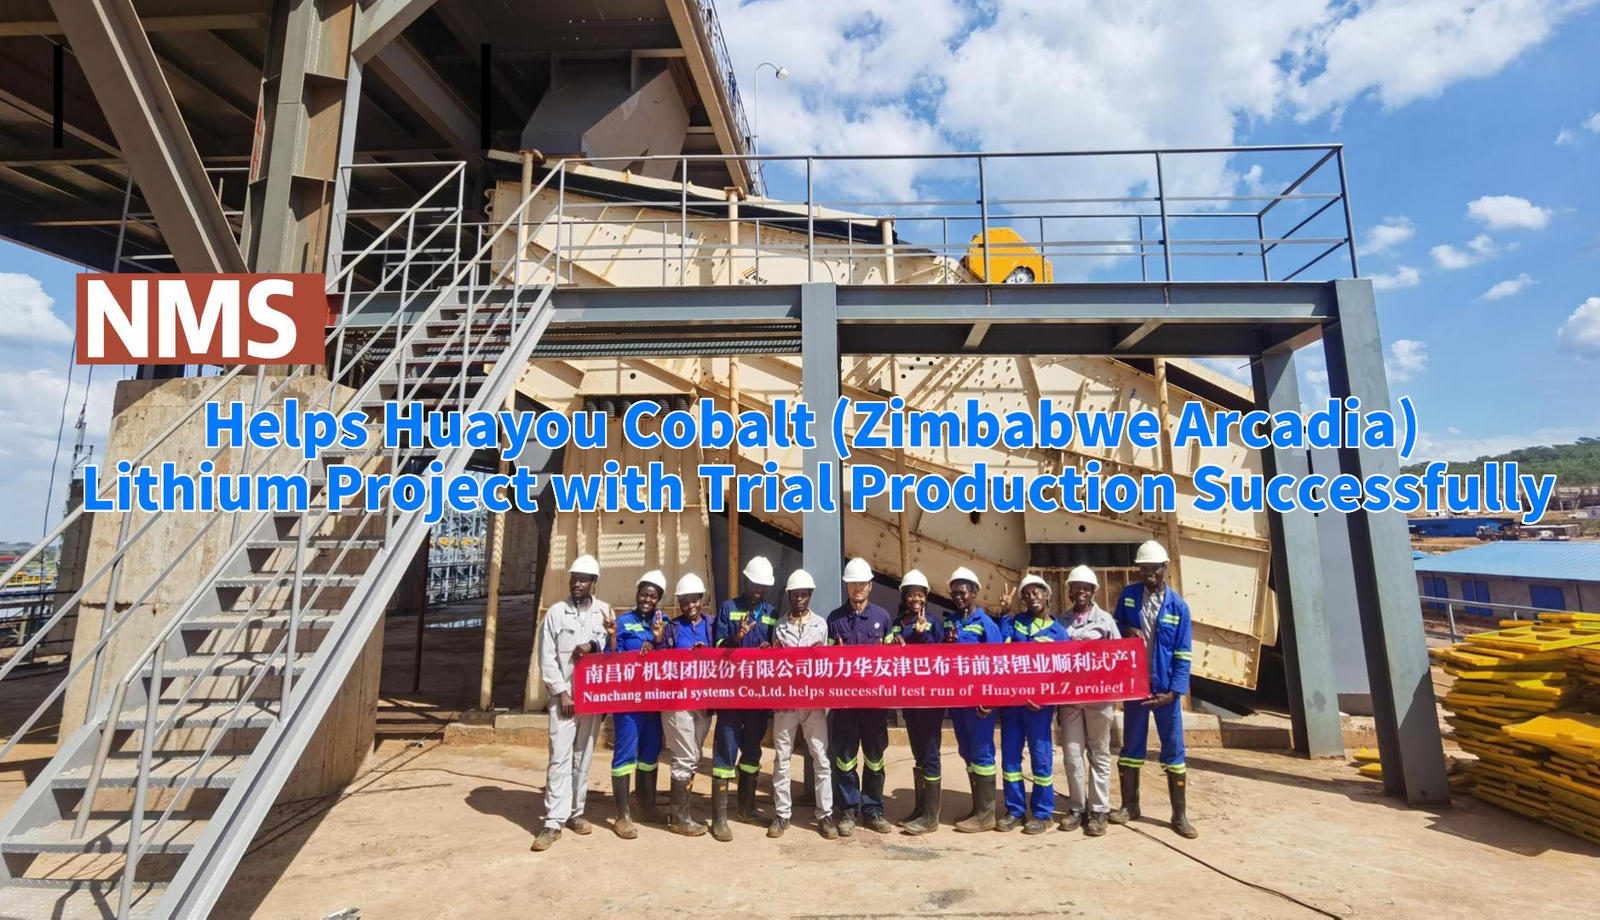 NMS Helps Huayou Cobalt (Zimbabwe Arcadia) Lithium Project with Trial Production Successfully